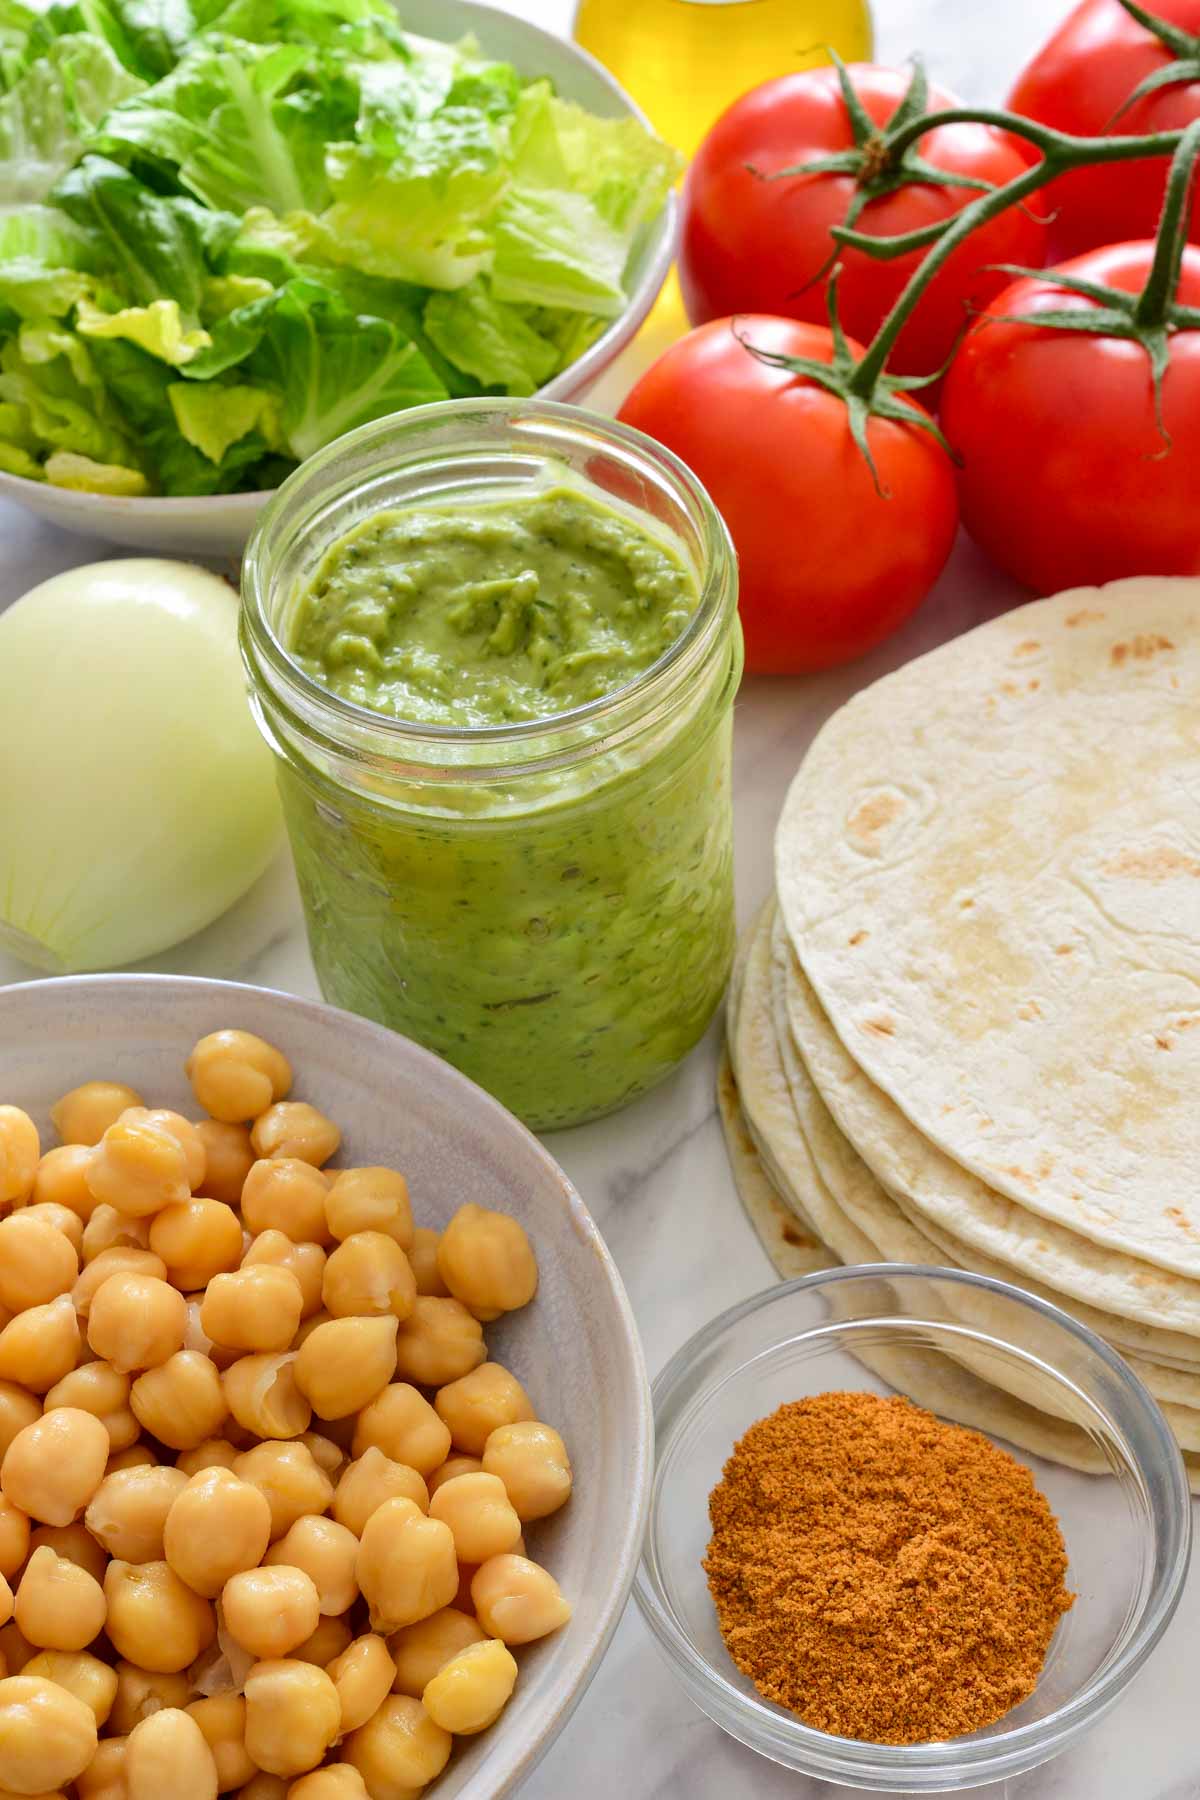 The ingredients for this recipe: a bowl of chickpeas, taco seasoning, avocado cream, tortillas, an onion, four tomatoes, a bowl of lettuce and a bottle of olive oil.